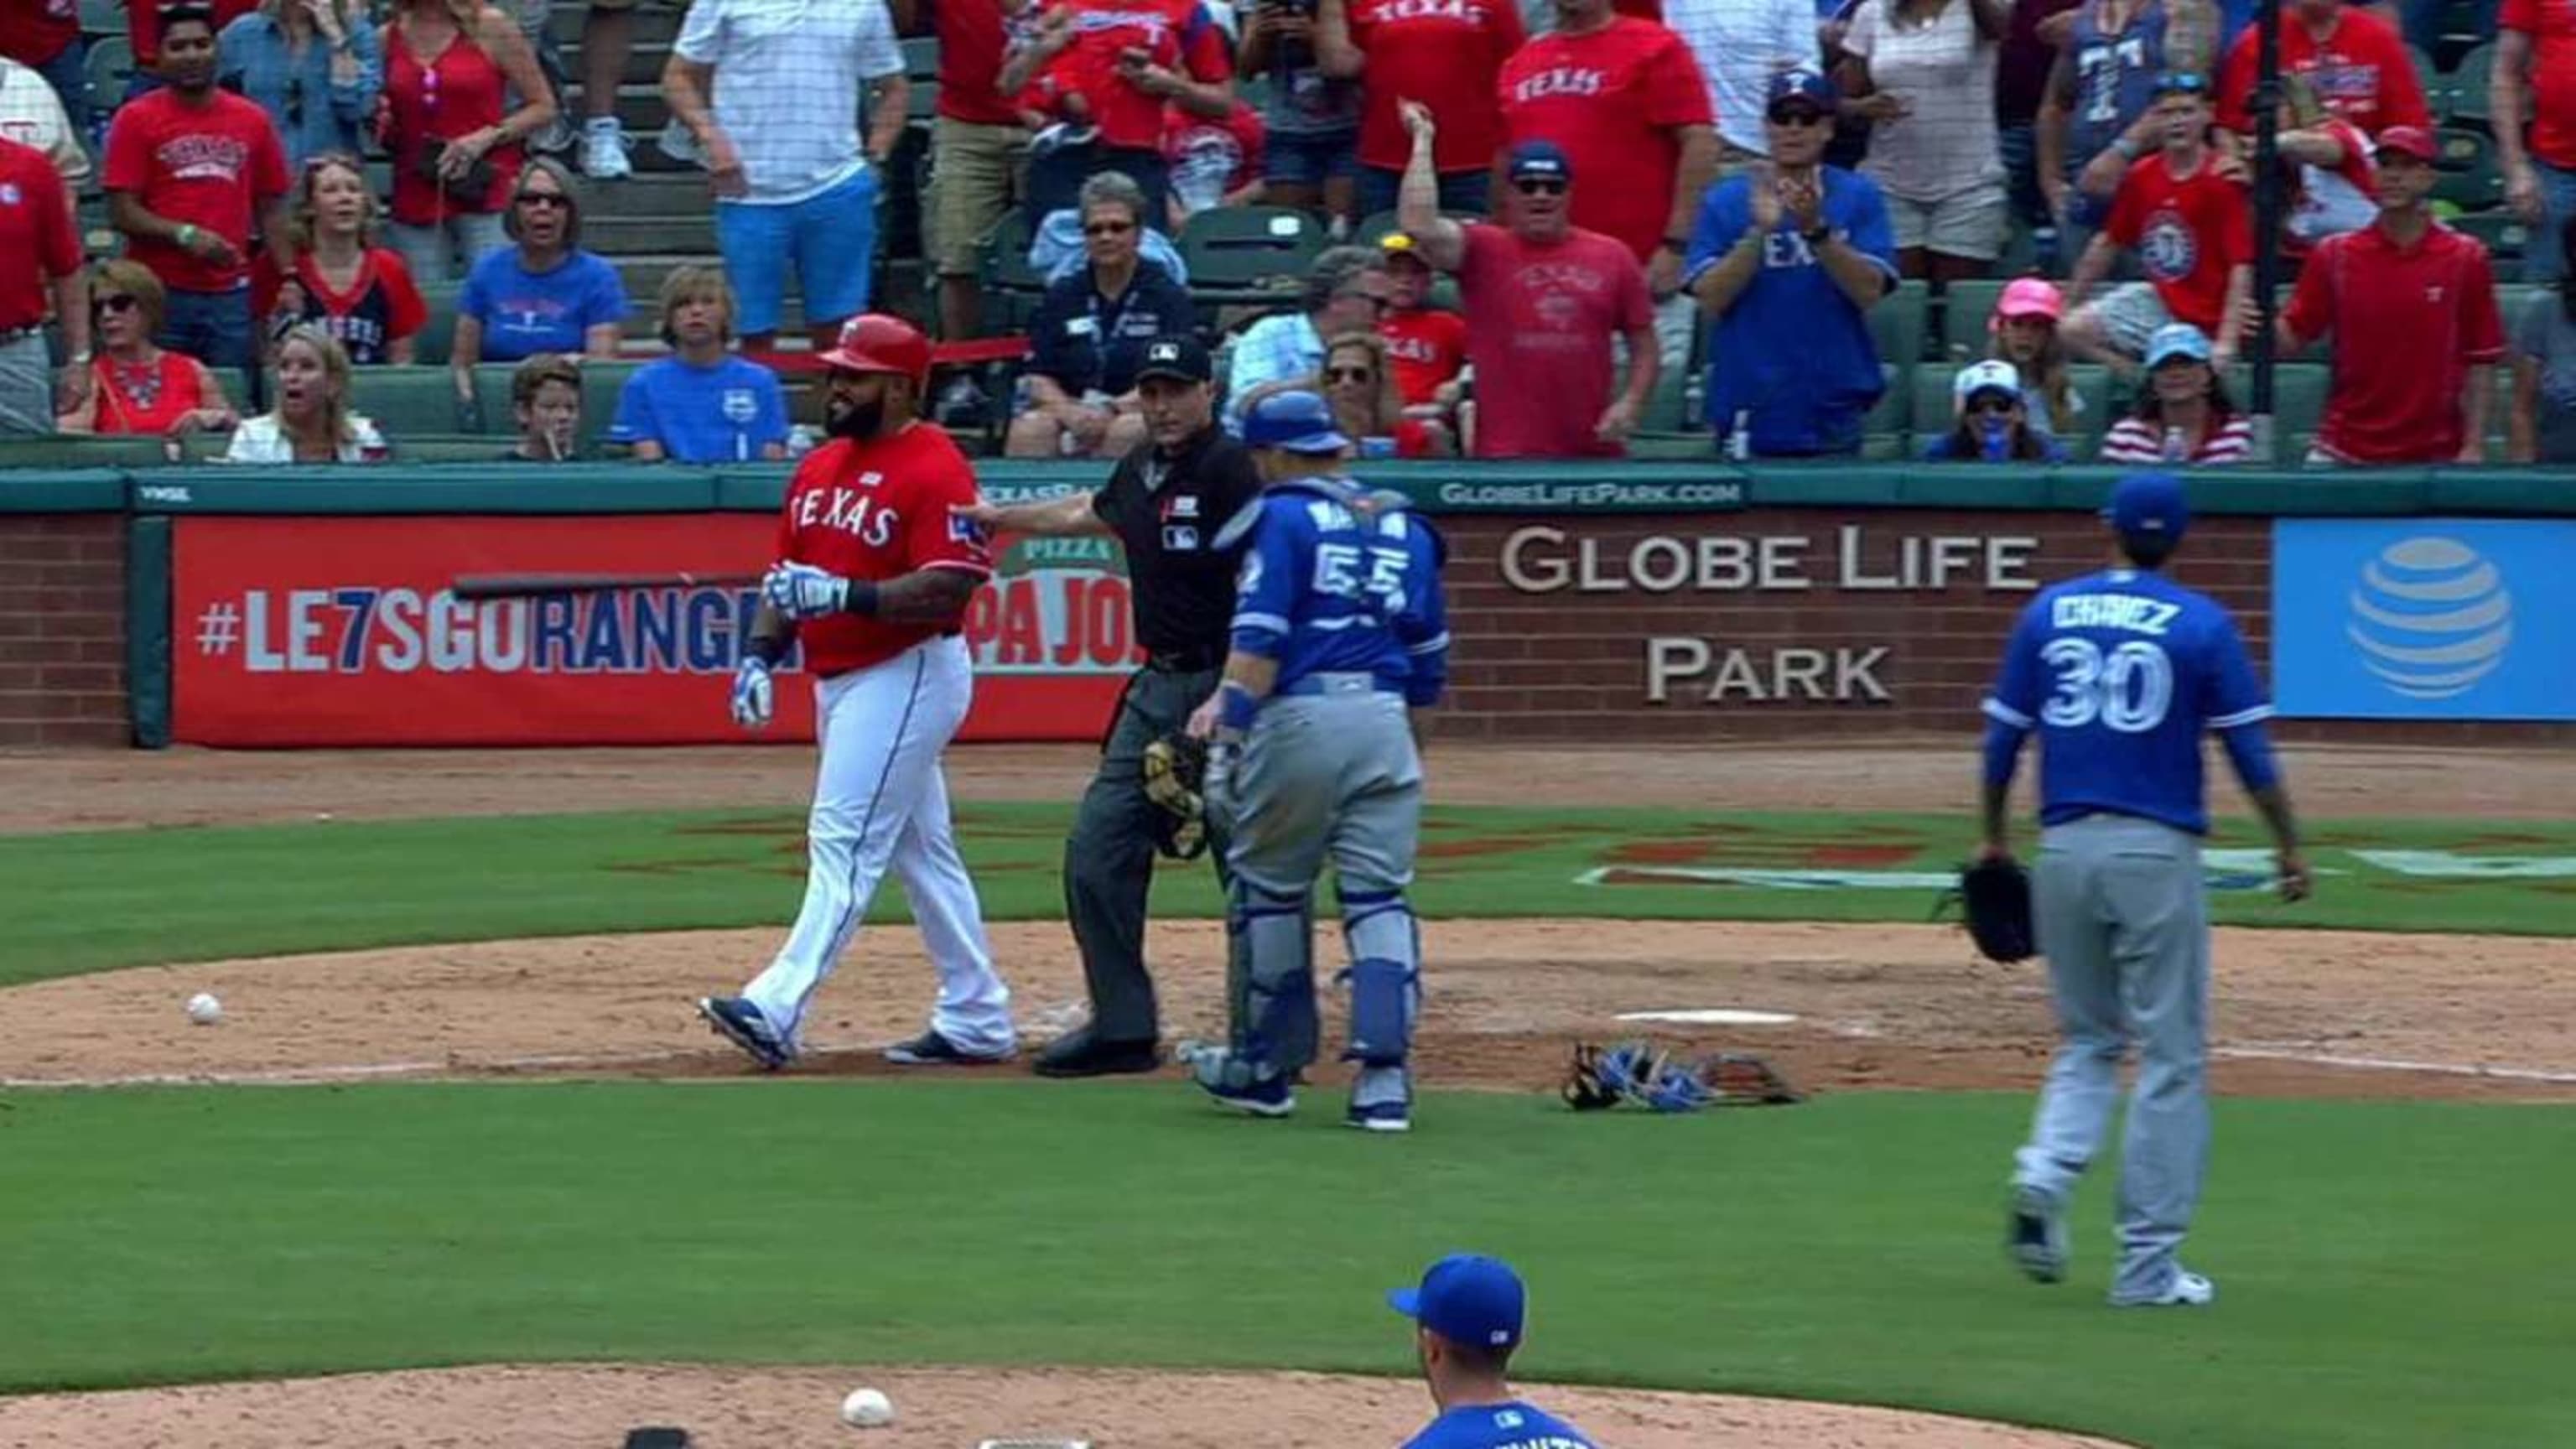 TEX@TOR Gm3: Odor introduced to boos in Toronto 